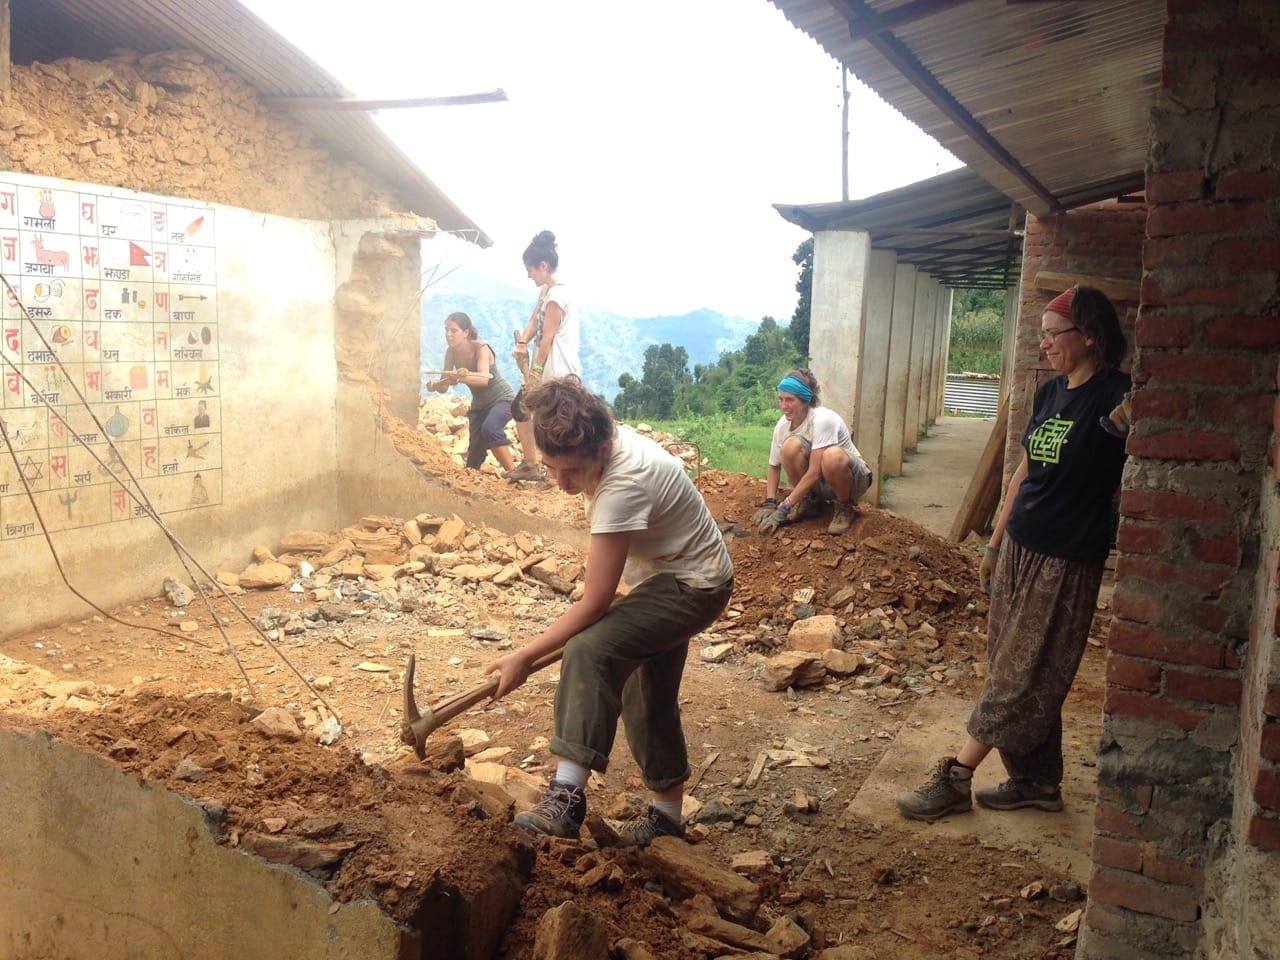 Volunteers assisting with building project in Nepal